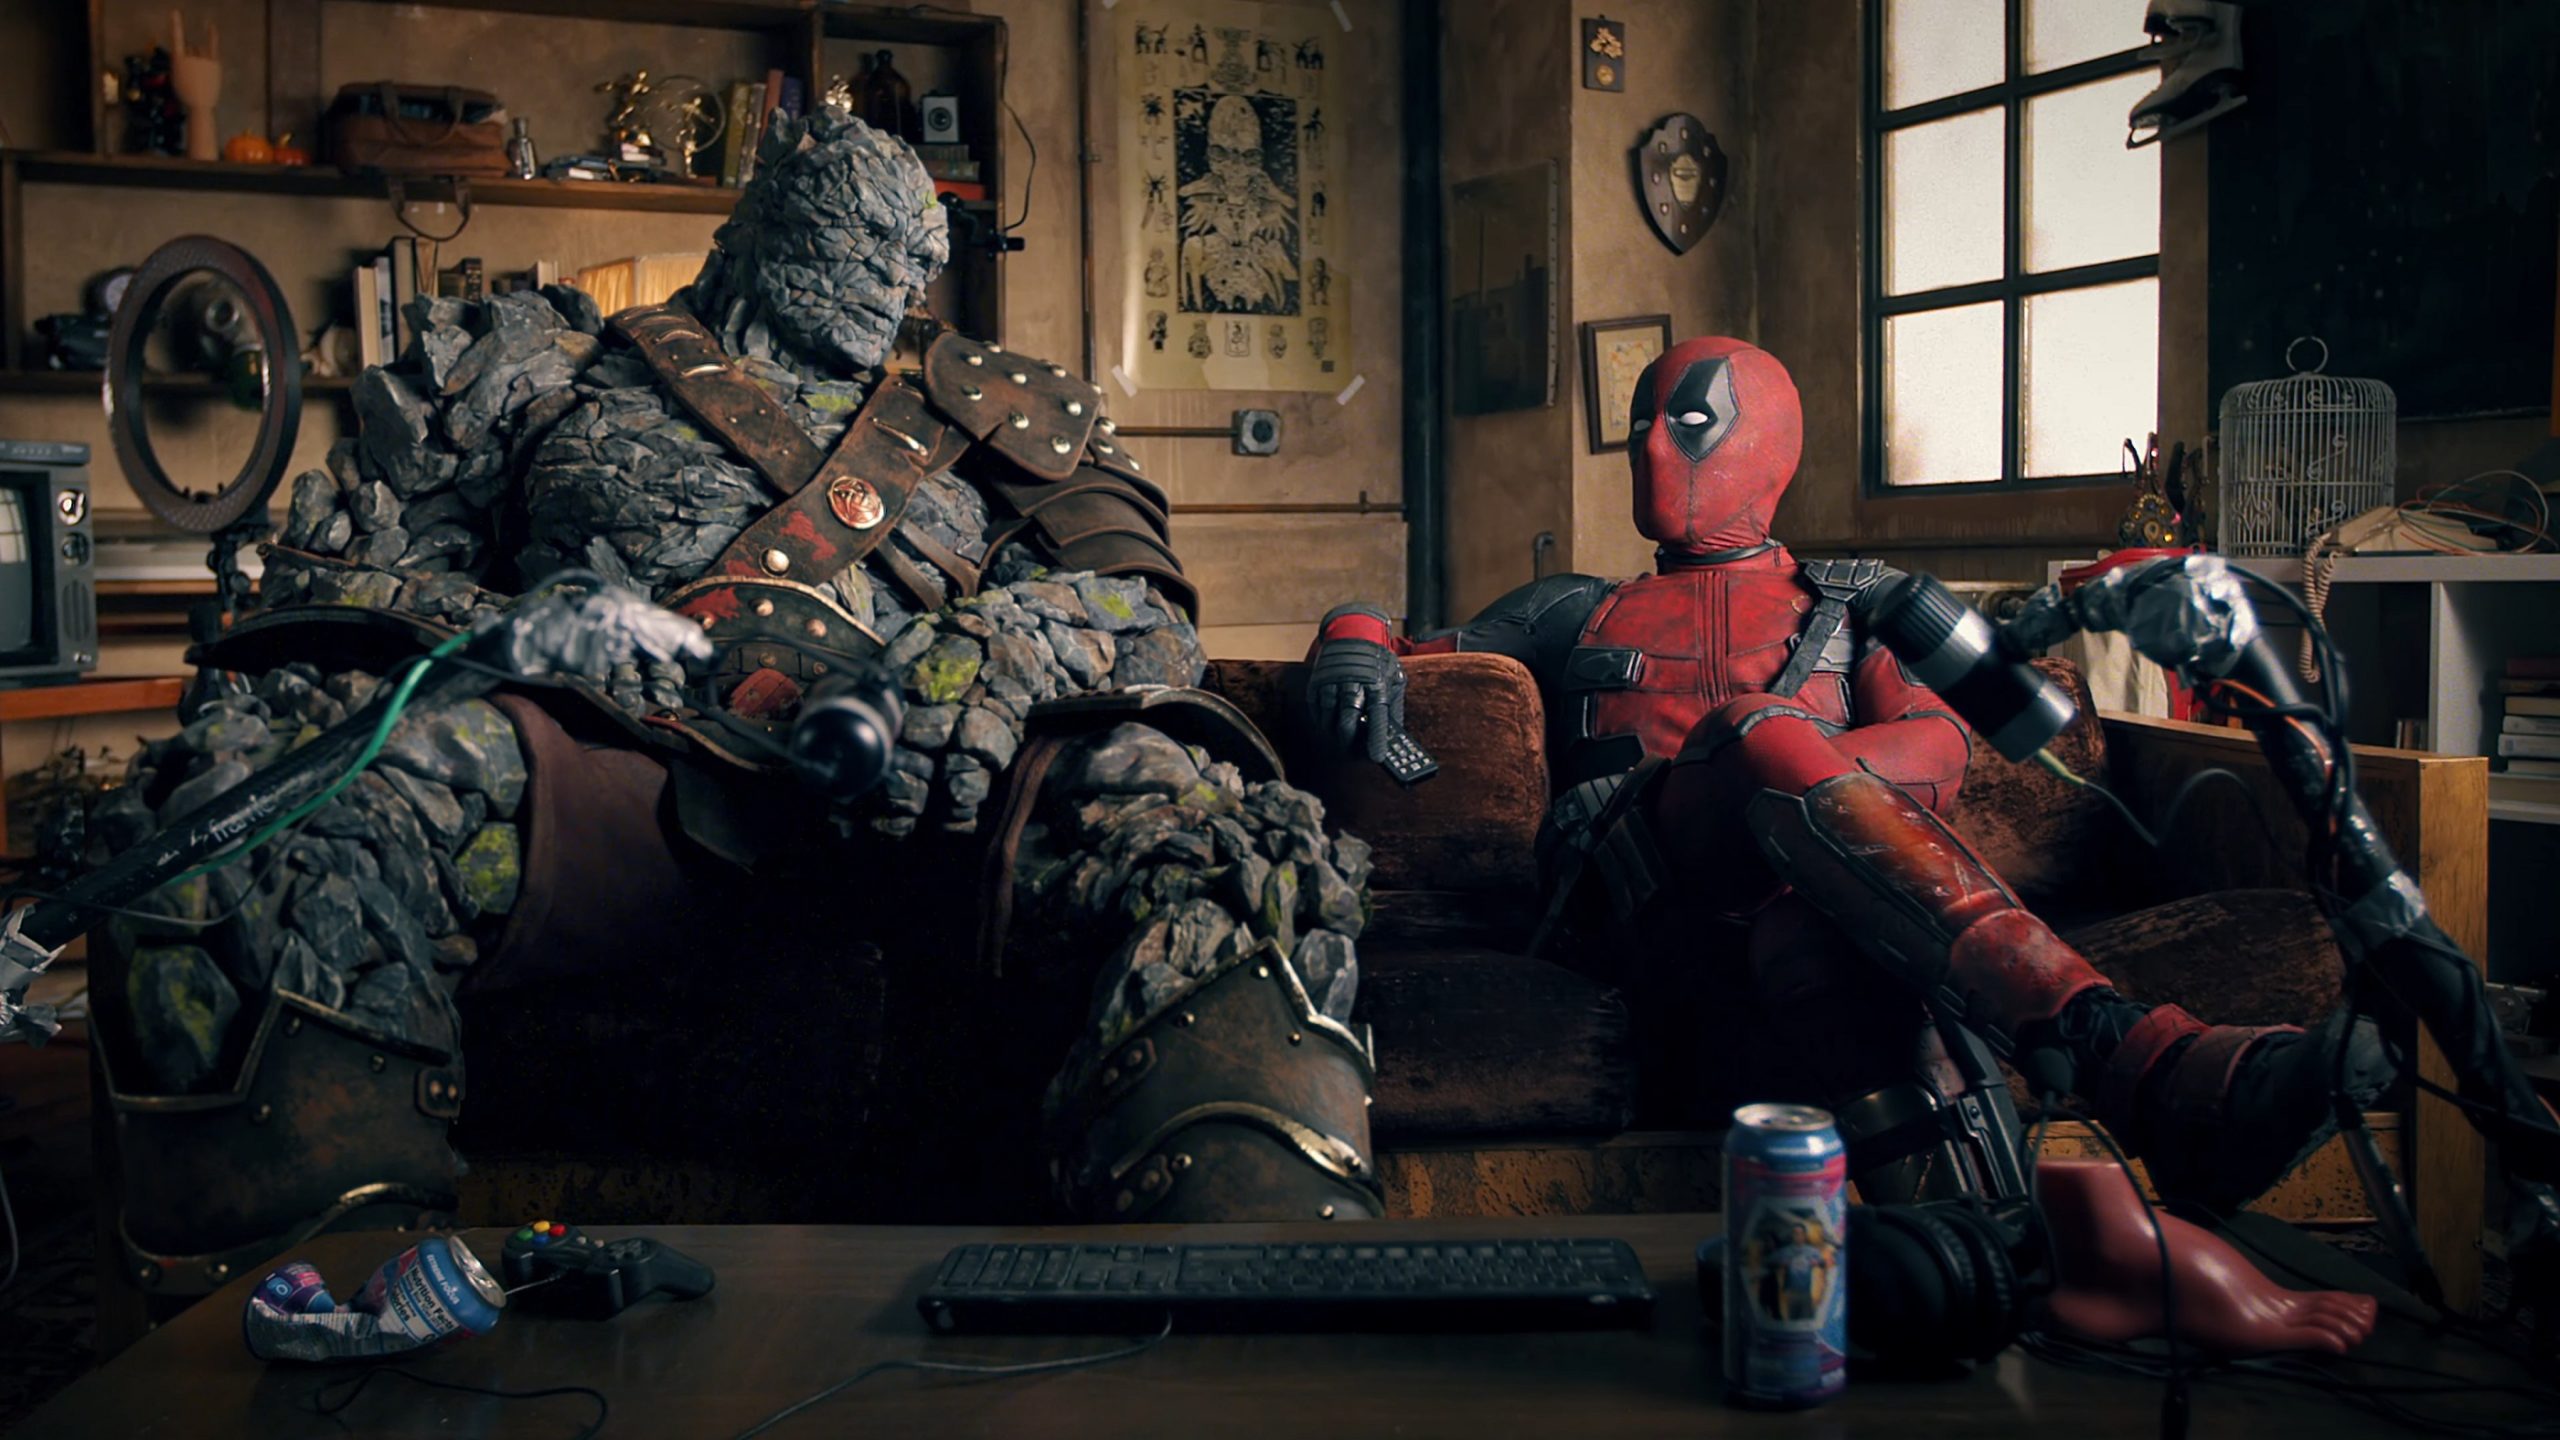 Kevin Feige hopes Deadpool 3 will be as big and as important as Infinity War, Civil War, and other wars